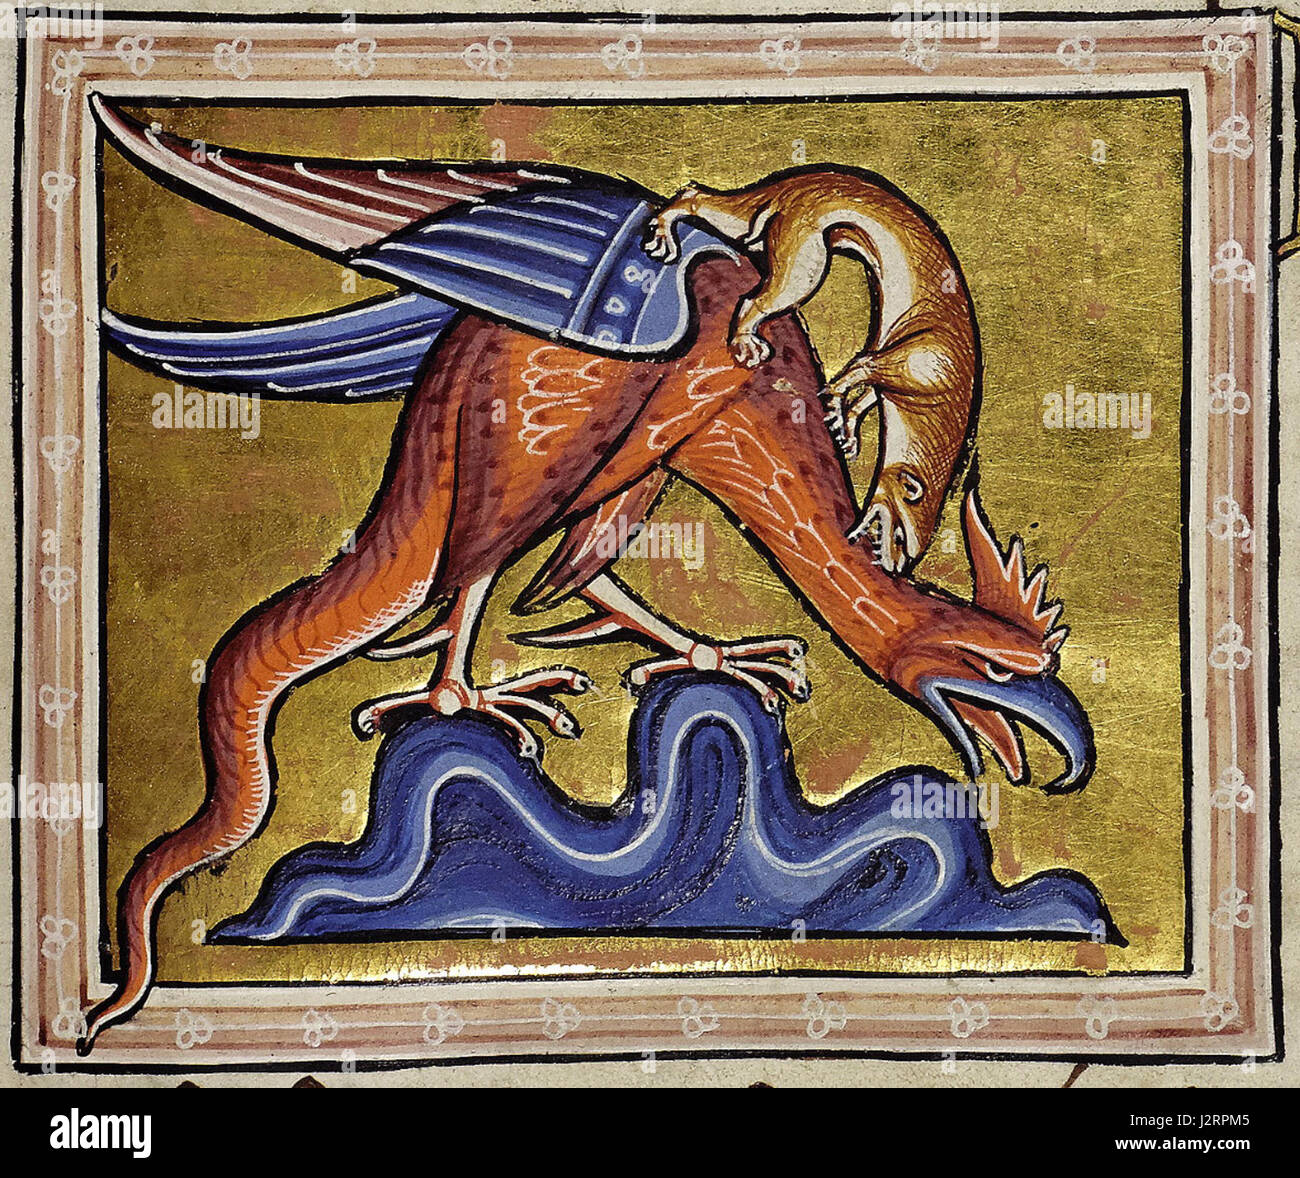 The Aberdeen Bestiary: Folio 66r - the dragon, De basilisco; Of the basilisk - The dragon kills by wrapping its tail around a victim and it can even kill elephants. The basilisk is the king of crawling things and can kill with a glance. This basilisk has a raptor's beak, a cockscomb, wings, a tail and claws. He is being attacked by a weasel Stock Photo